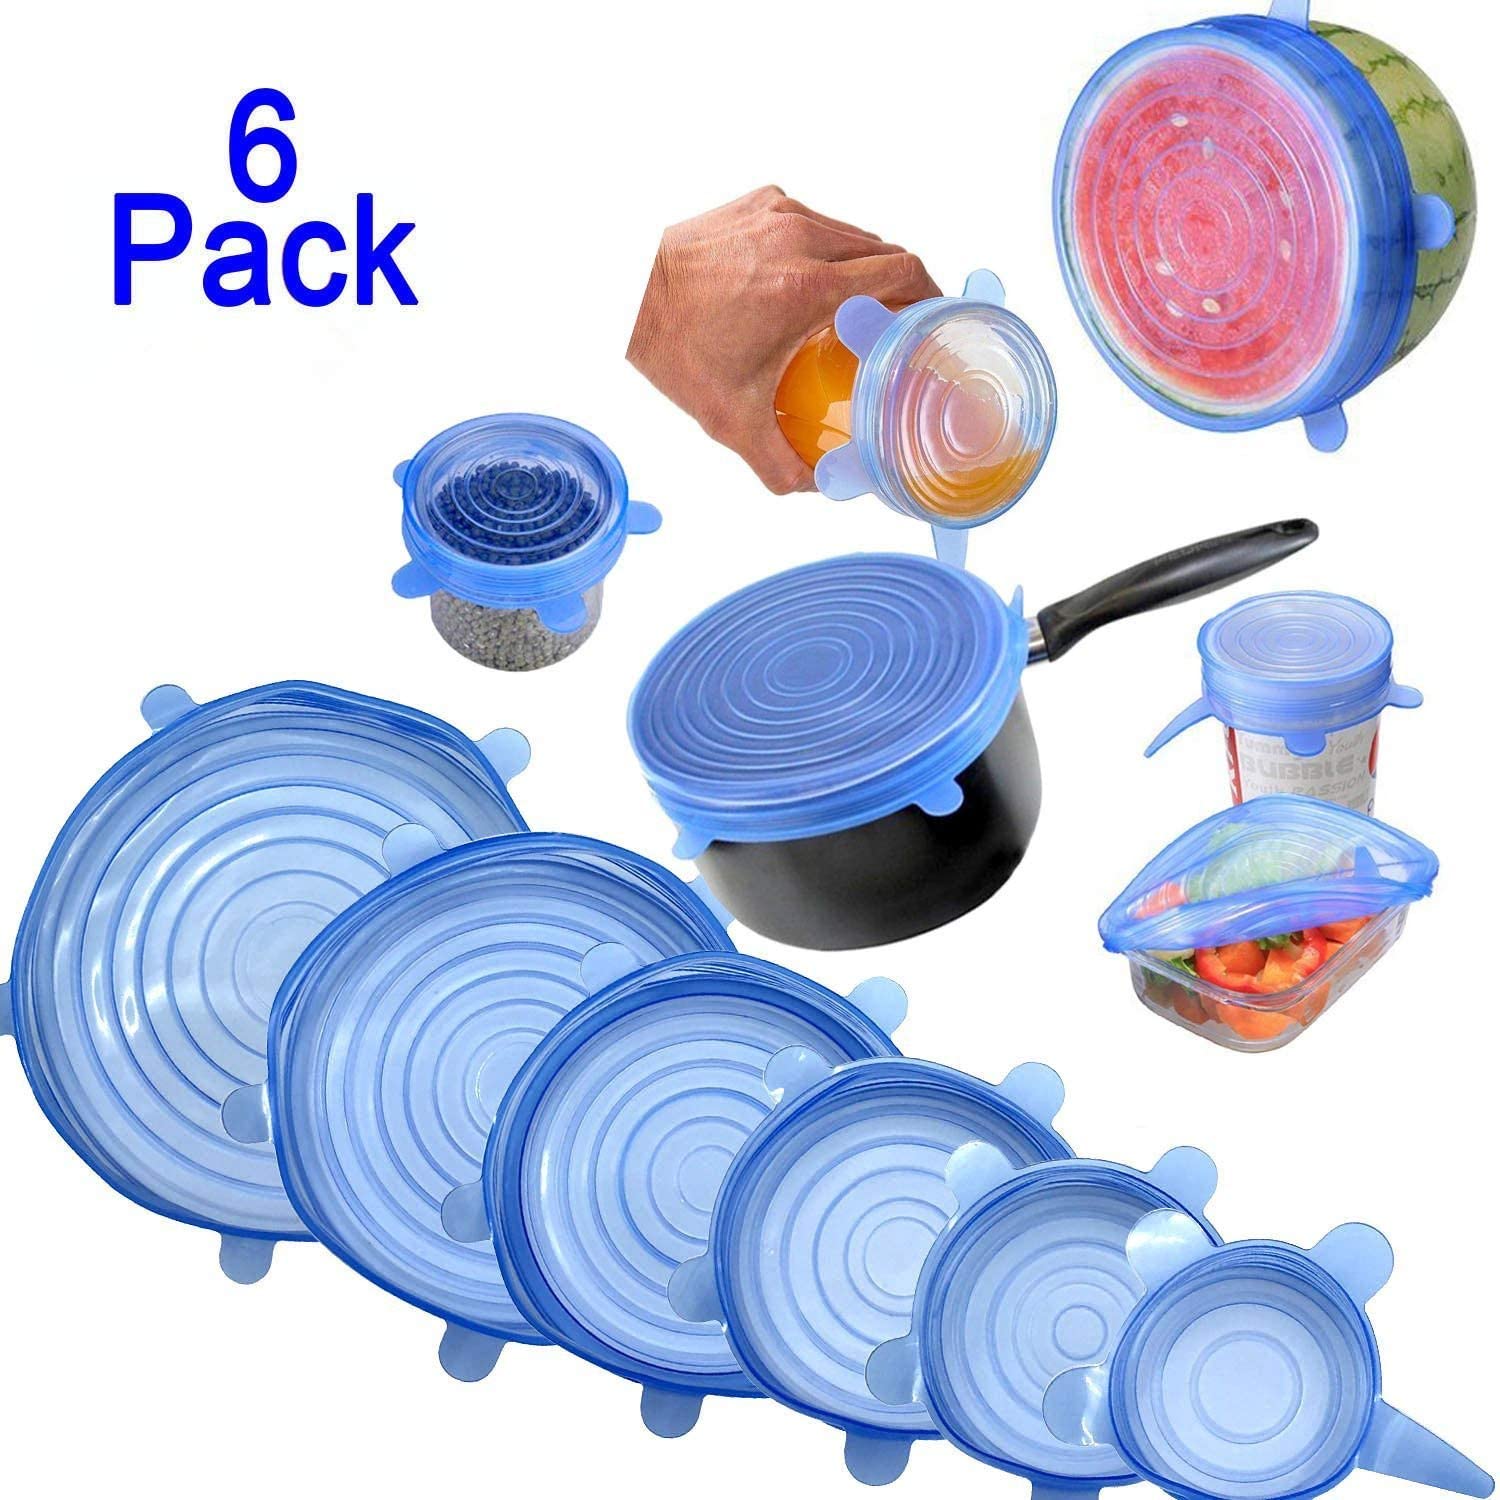 Pack of 12 Stretch Silicone Lids Kitchen Reusable Silicone Stretch Seal Lid for Food Preservation,